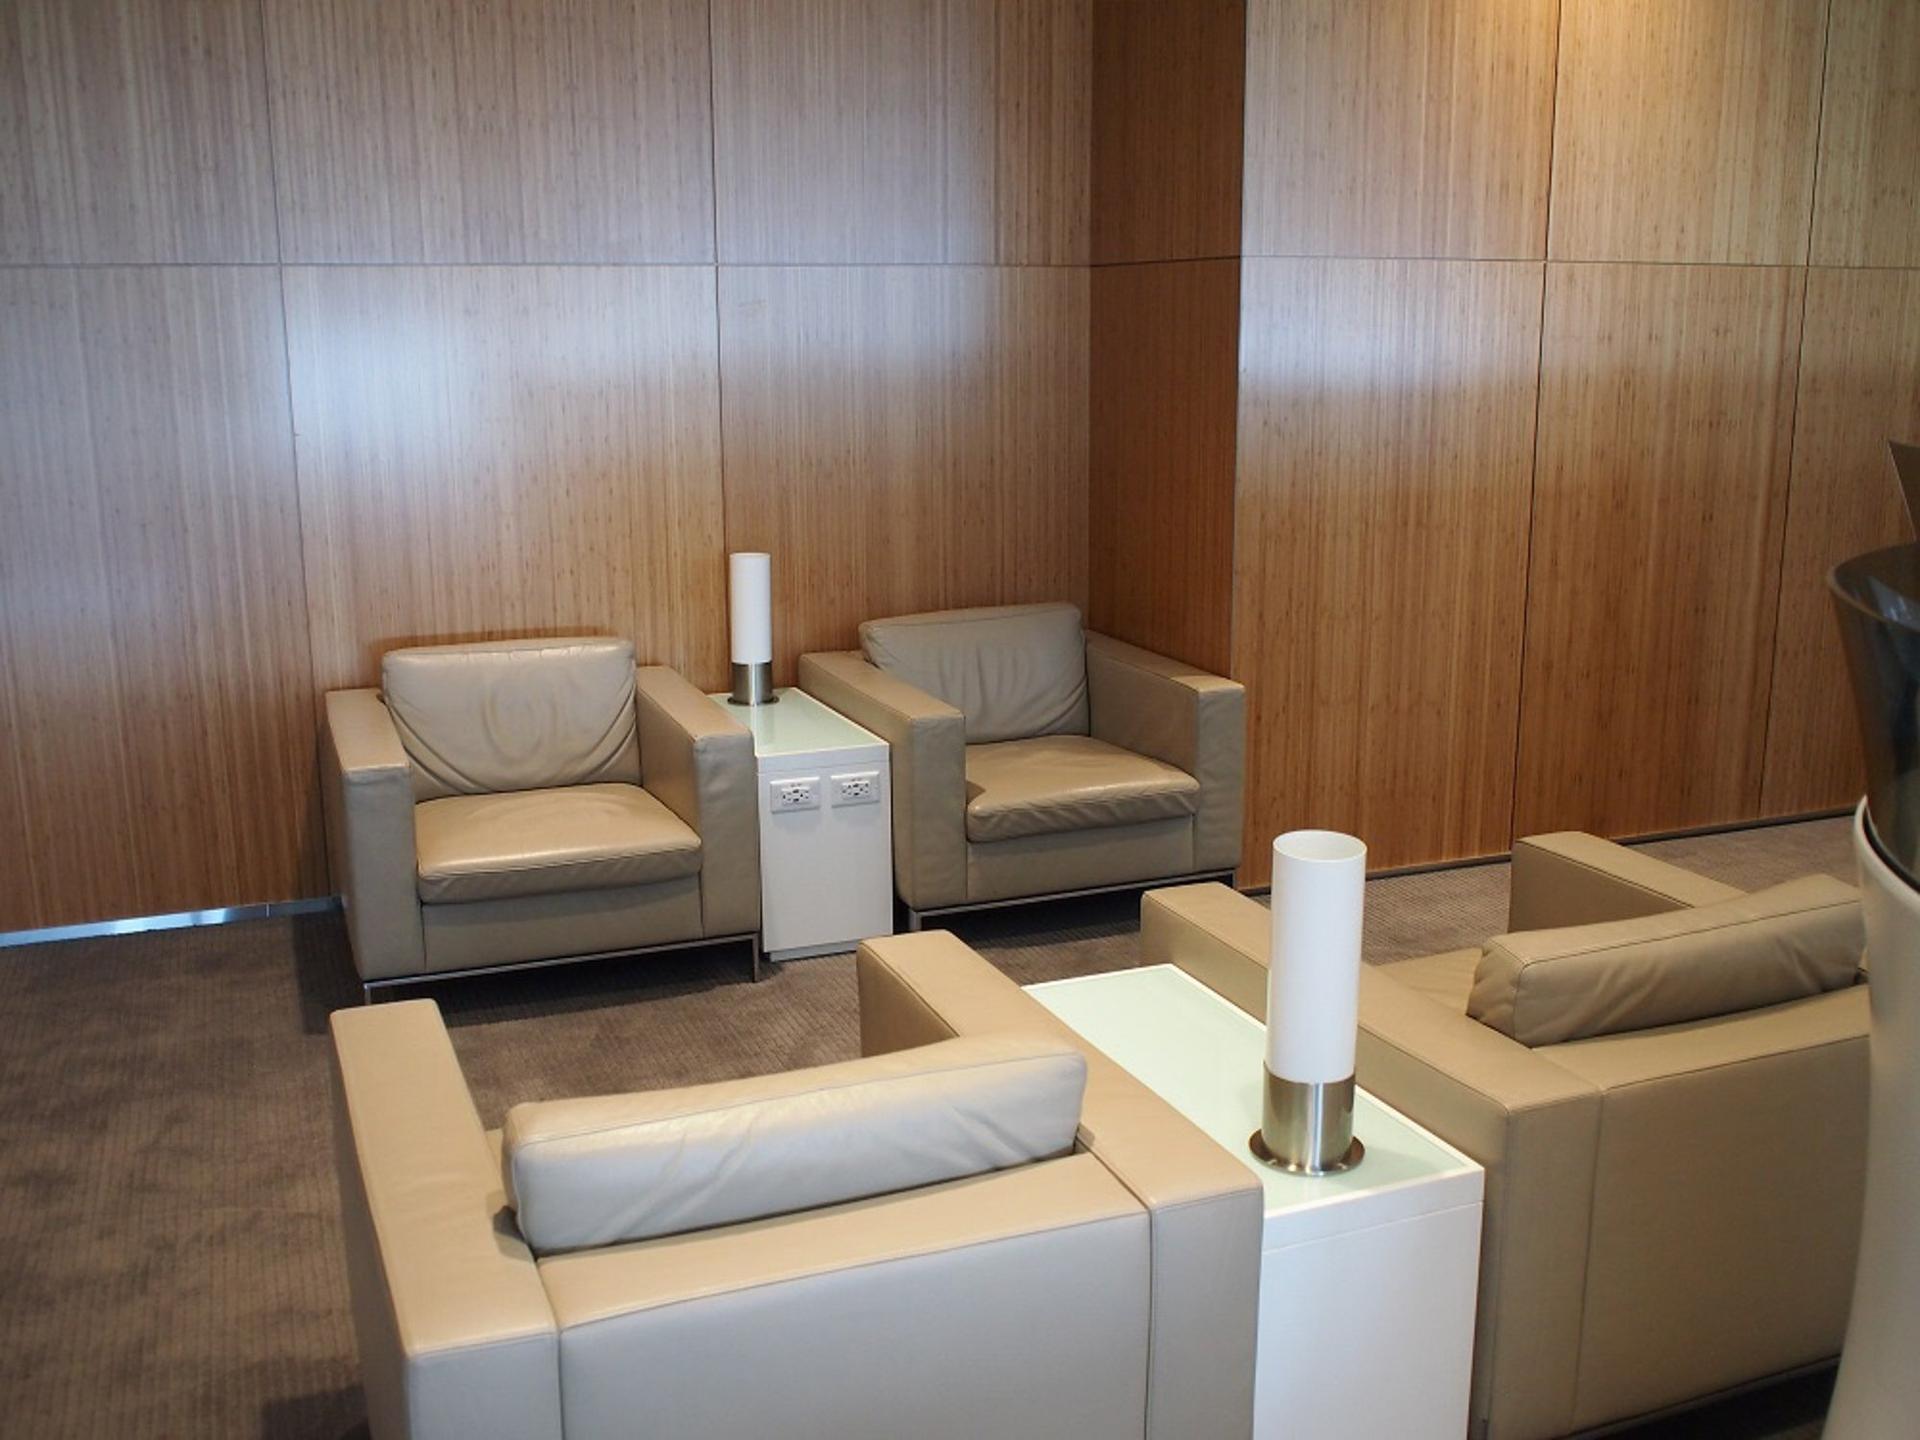 Cathay Pacific First and Business Class Lounge image 28 of 74